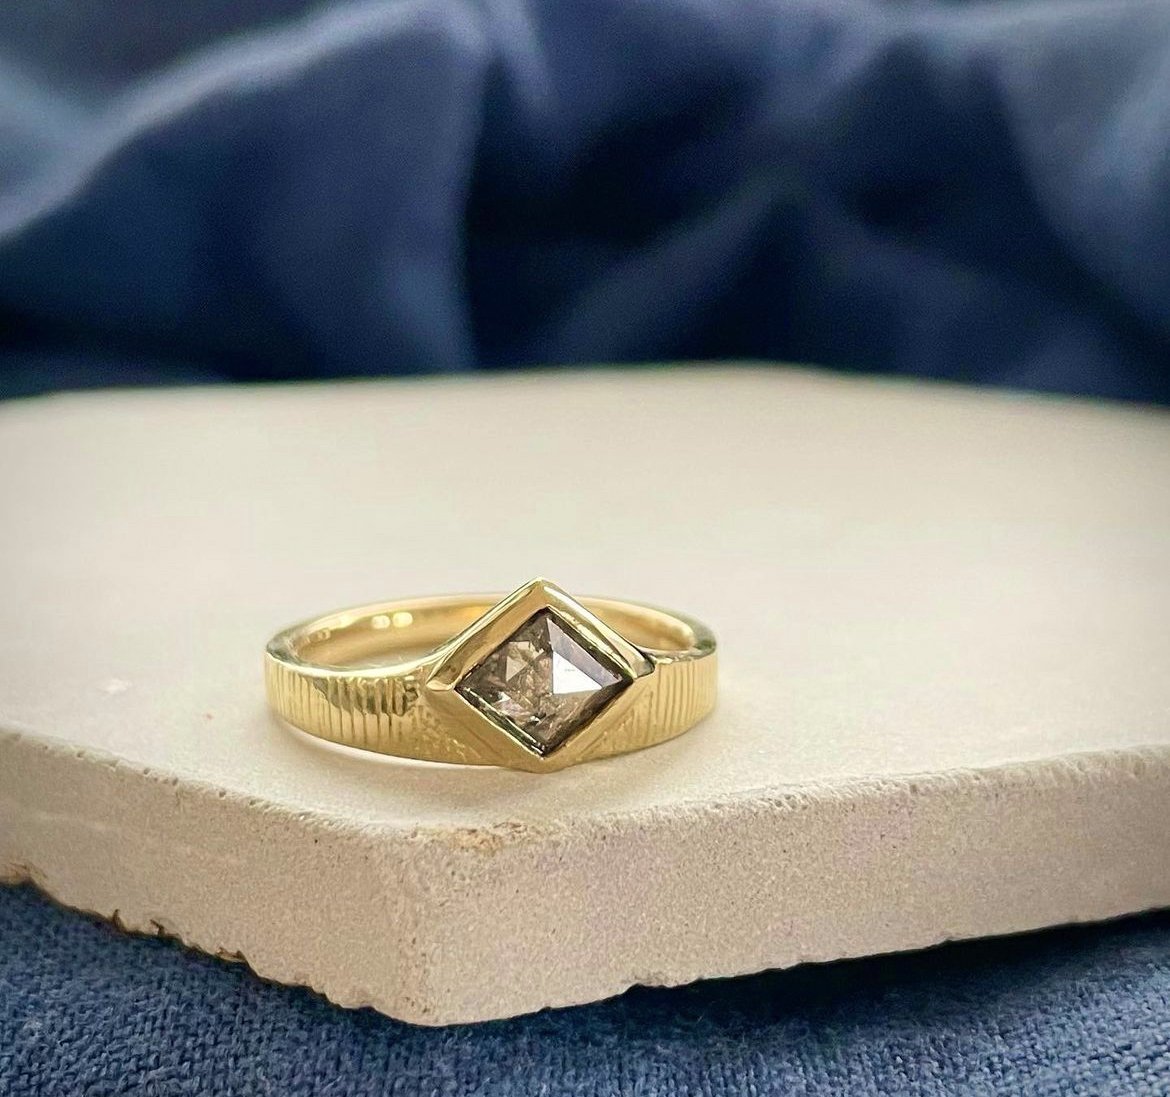  A modern bespoke wedding ring. The chunky, graphic textured gold band showcases a diamond shaped stone set within it. 